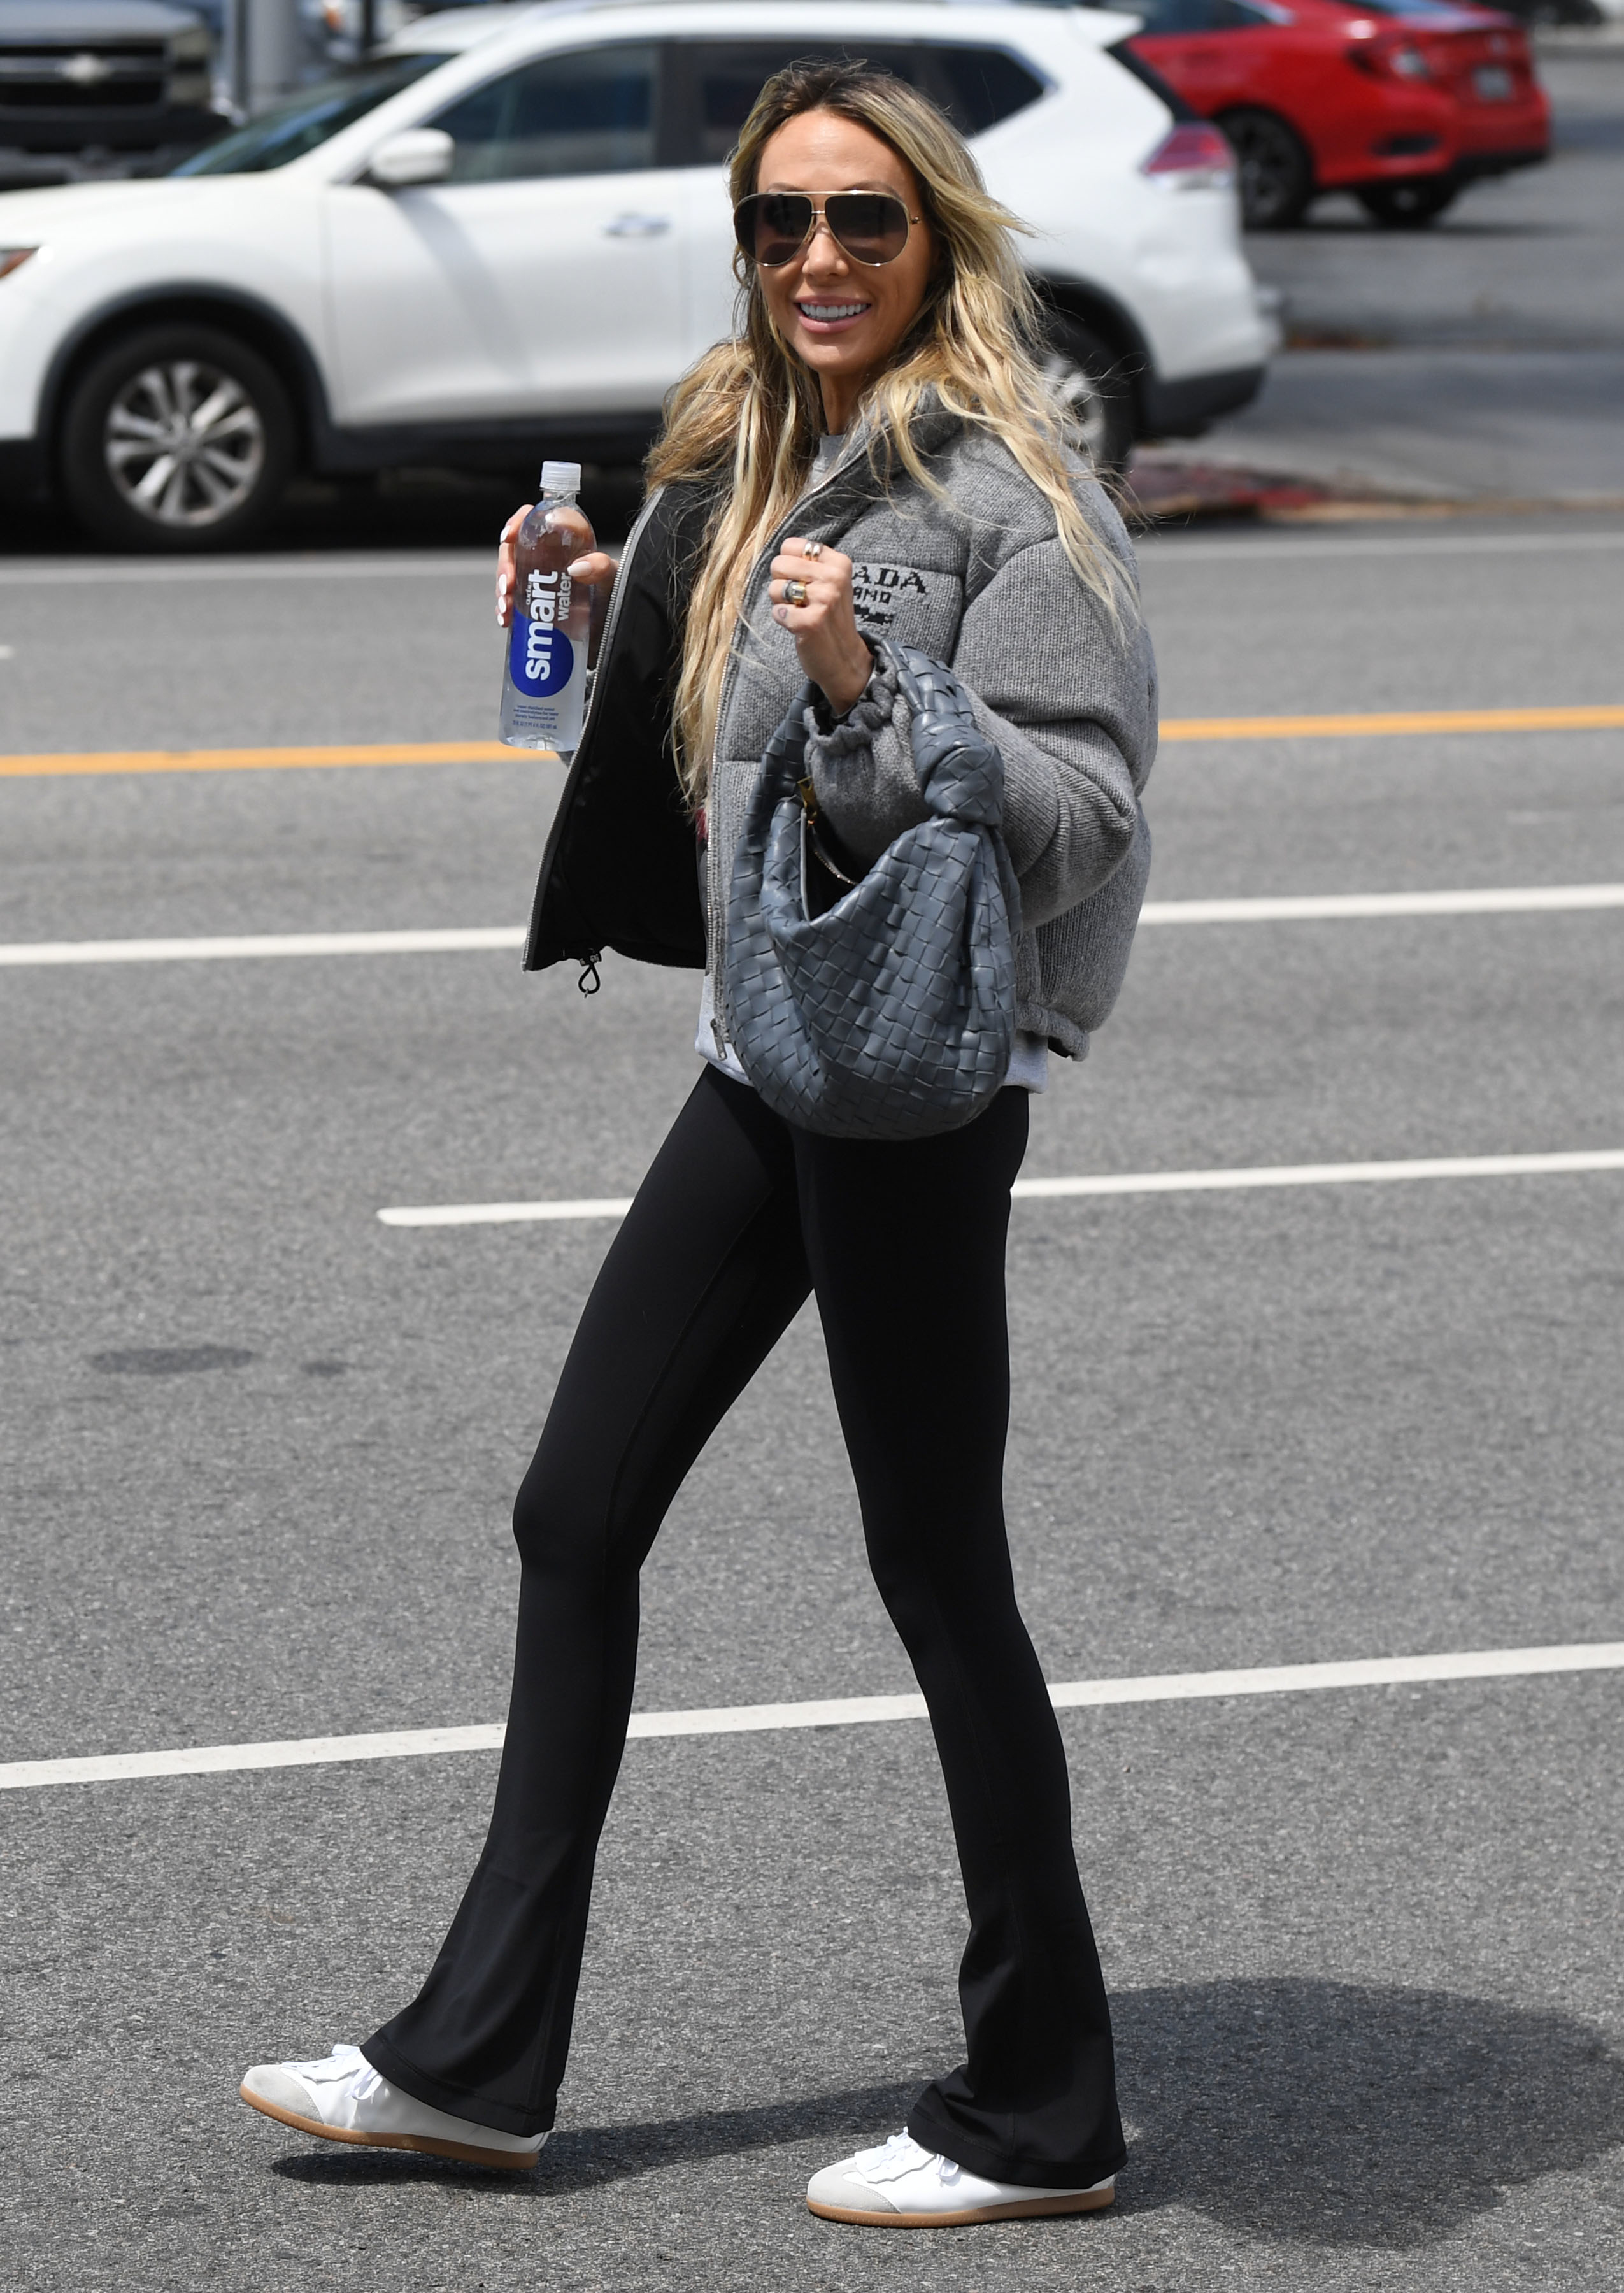 Woman in casual clothing with sunglasses, holding a water bottle, walking on a street